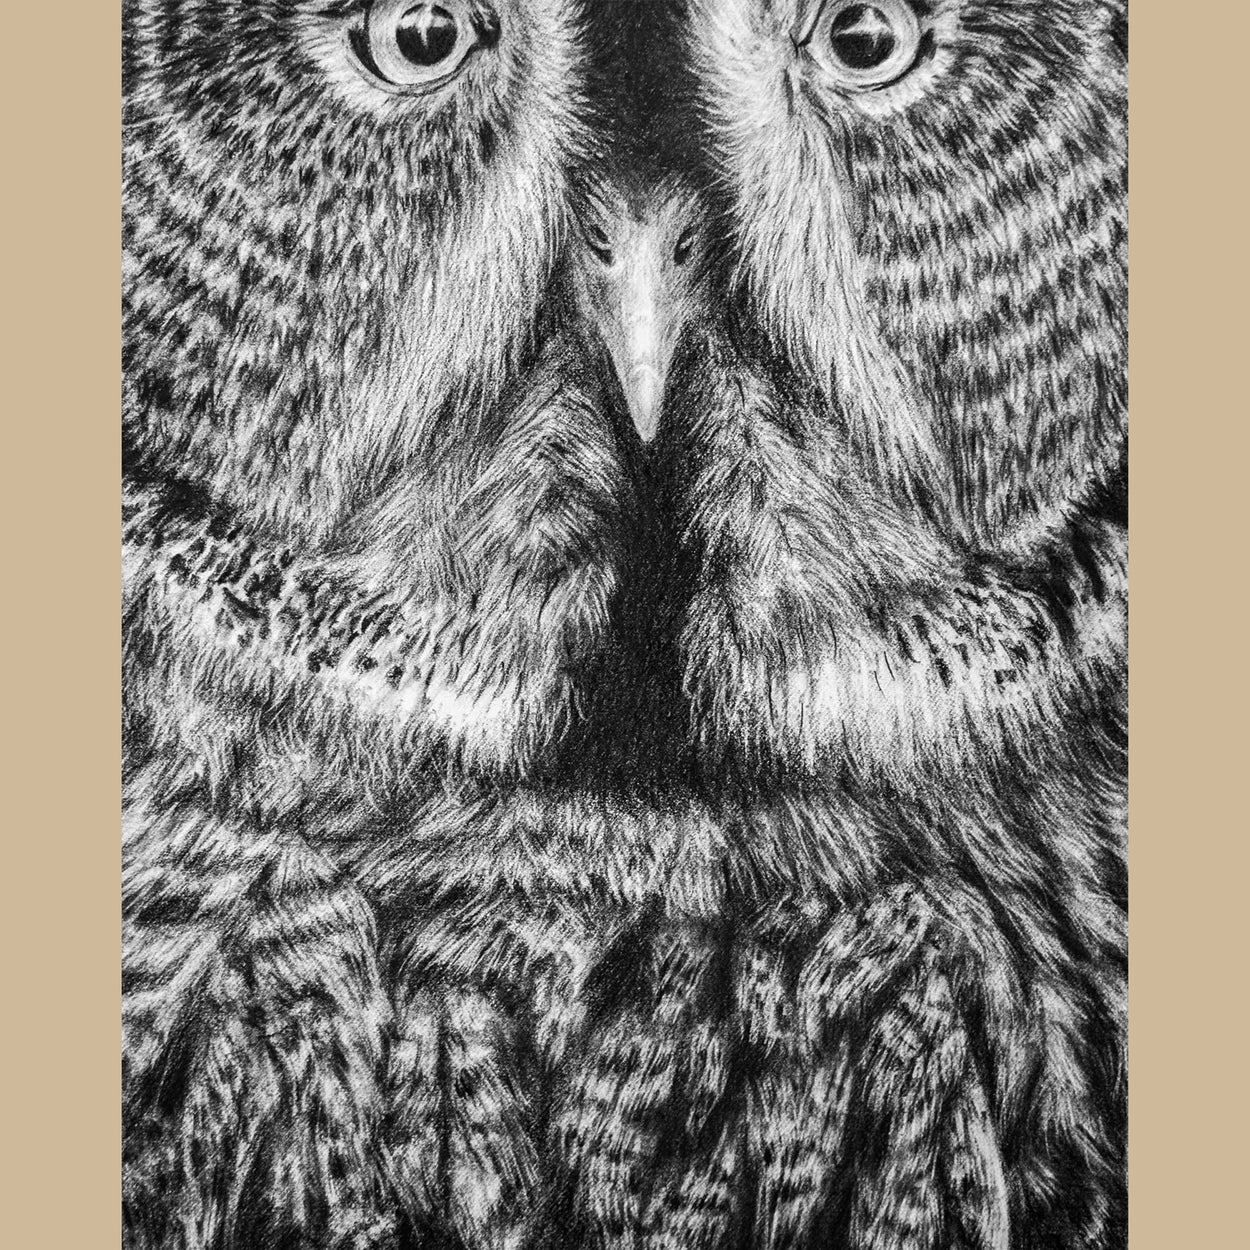 Great Grey Owl Charcoal Drawing Close-up 2 - Jill Dimond